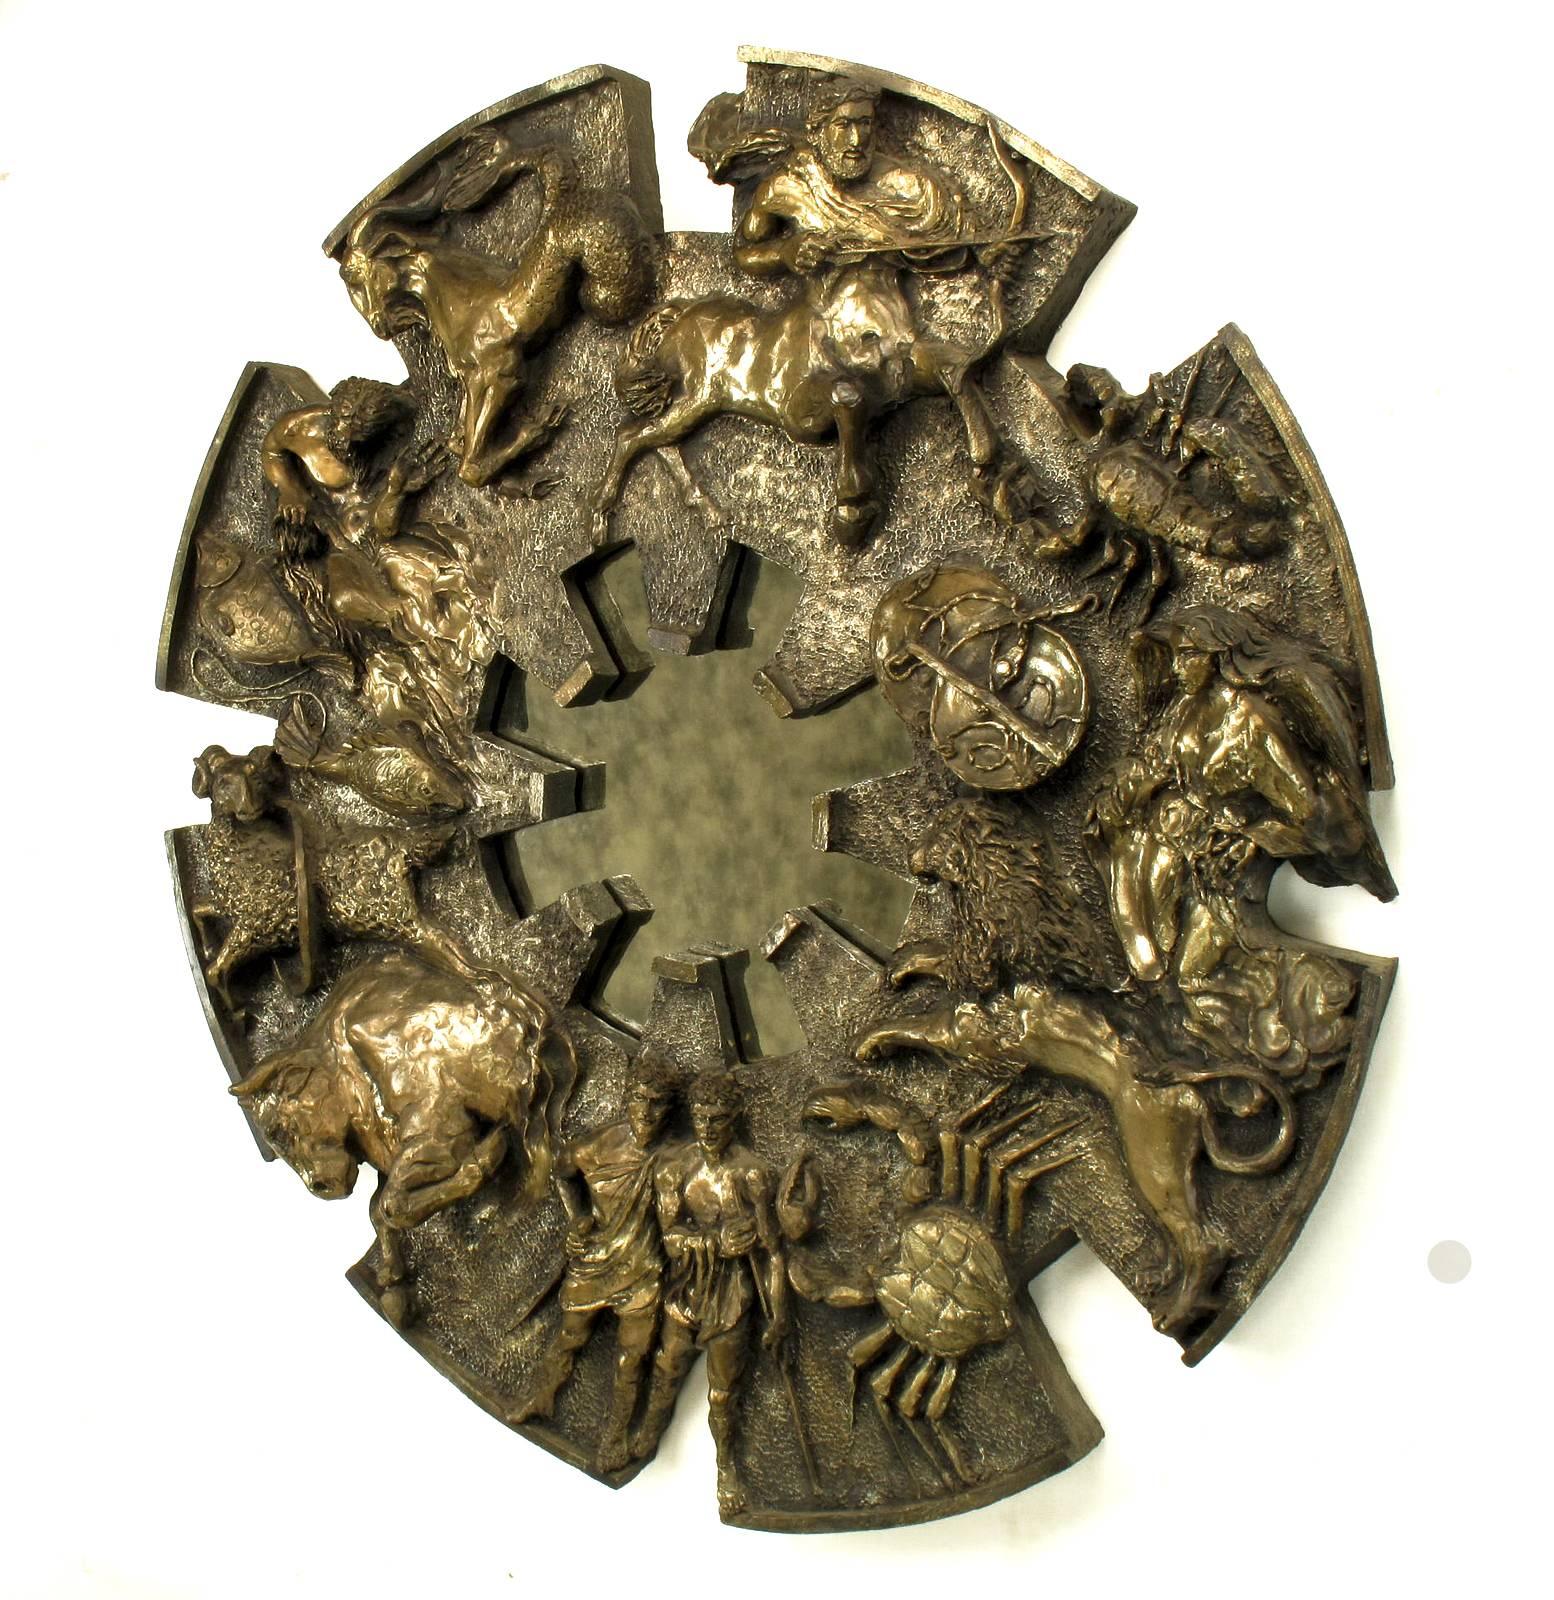 Incredible and finely cast wall mirror with relief symbolic of the 12 signs of the Zodiac. Bronze dipped and patinated with an eight cog gear shaped antiqued mirror. The wall hanging itself is an eight cogged gear like wheel. In ancient mythology